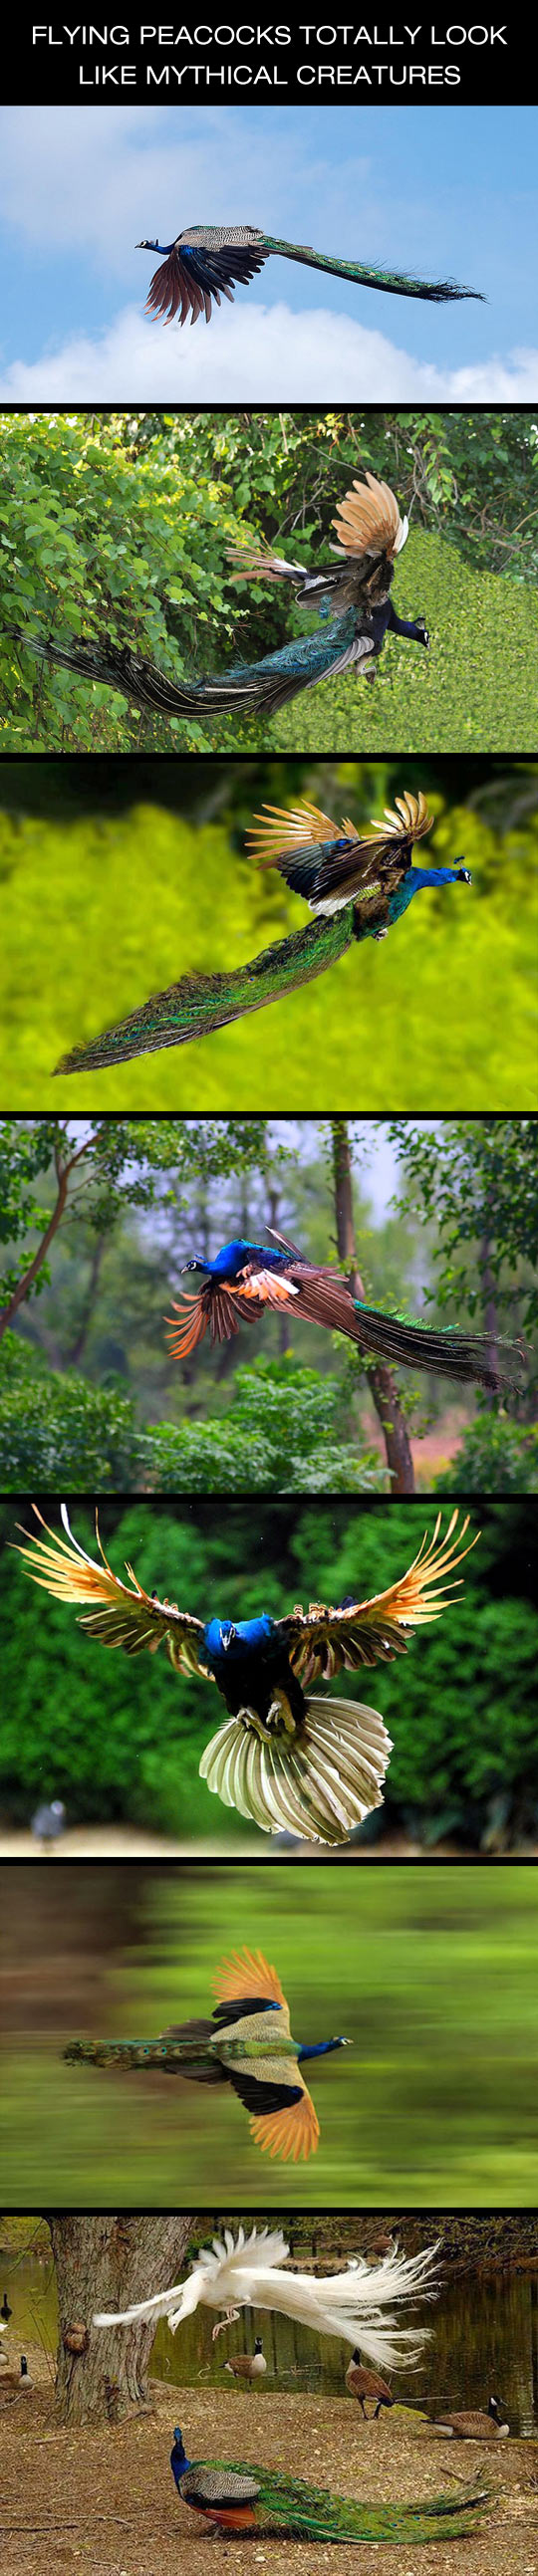 Flying peacocks are freaking majestic.